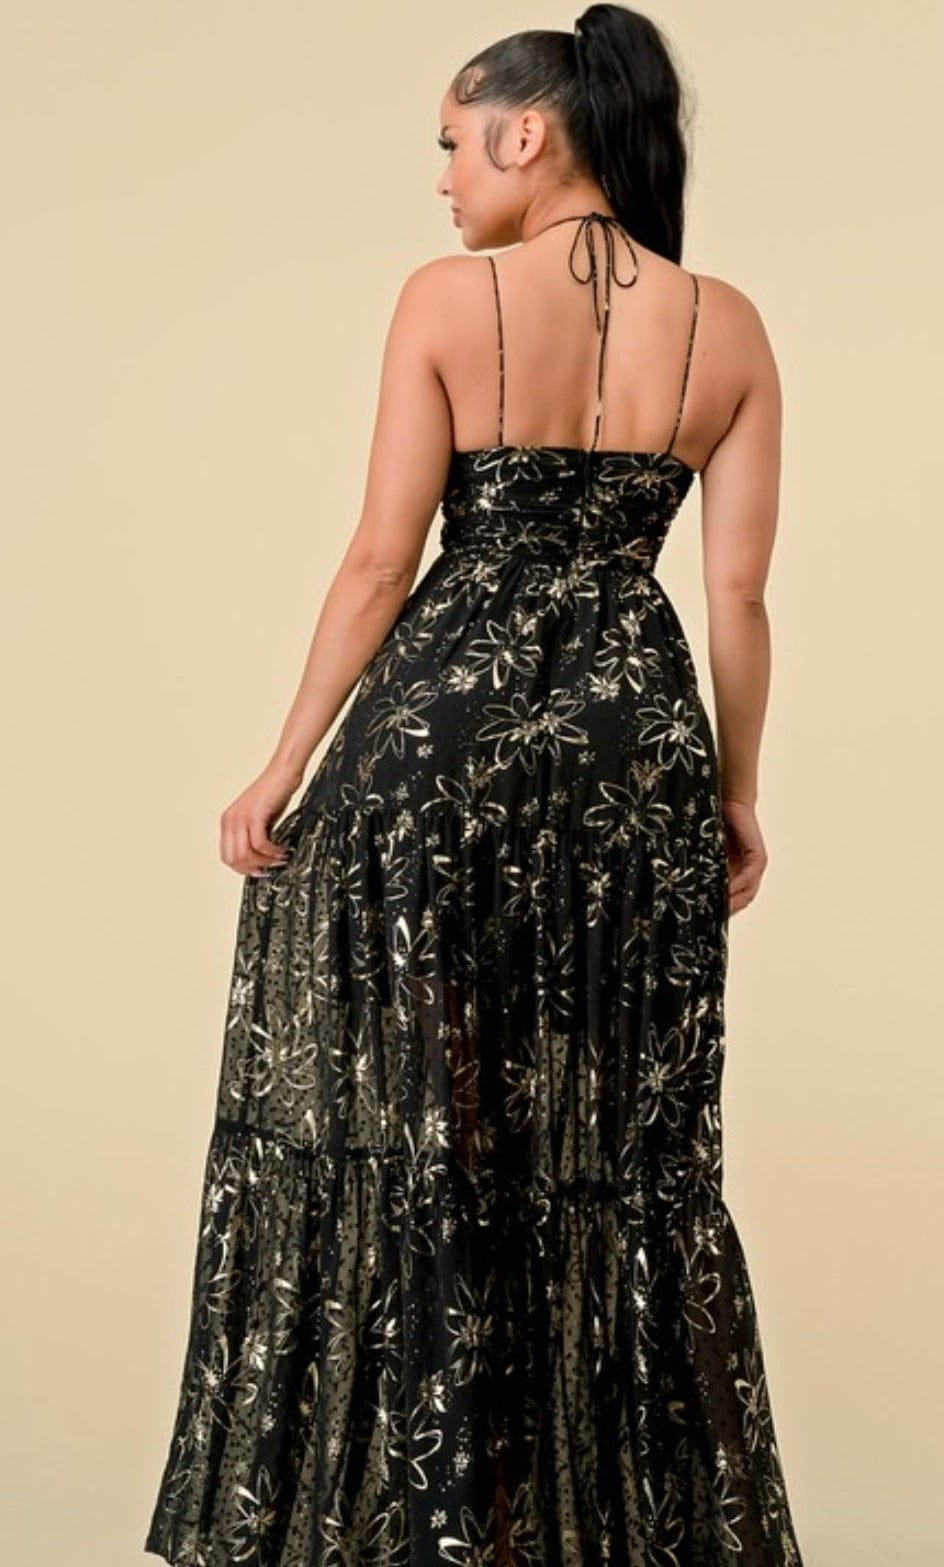 "Golden Goddess: Black and Gold Maxi Dress for a Sassy and Sophisticated Look"